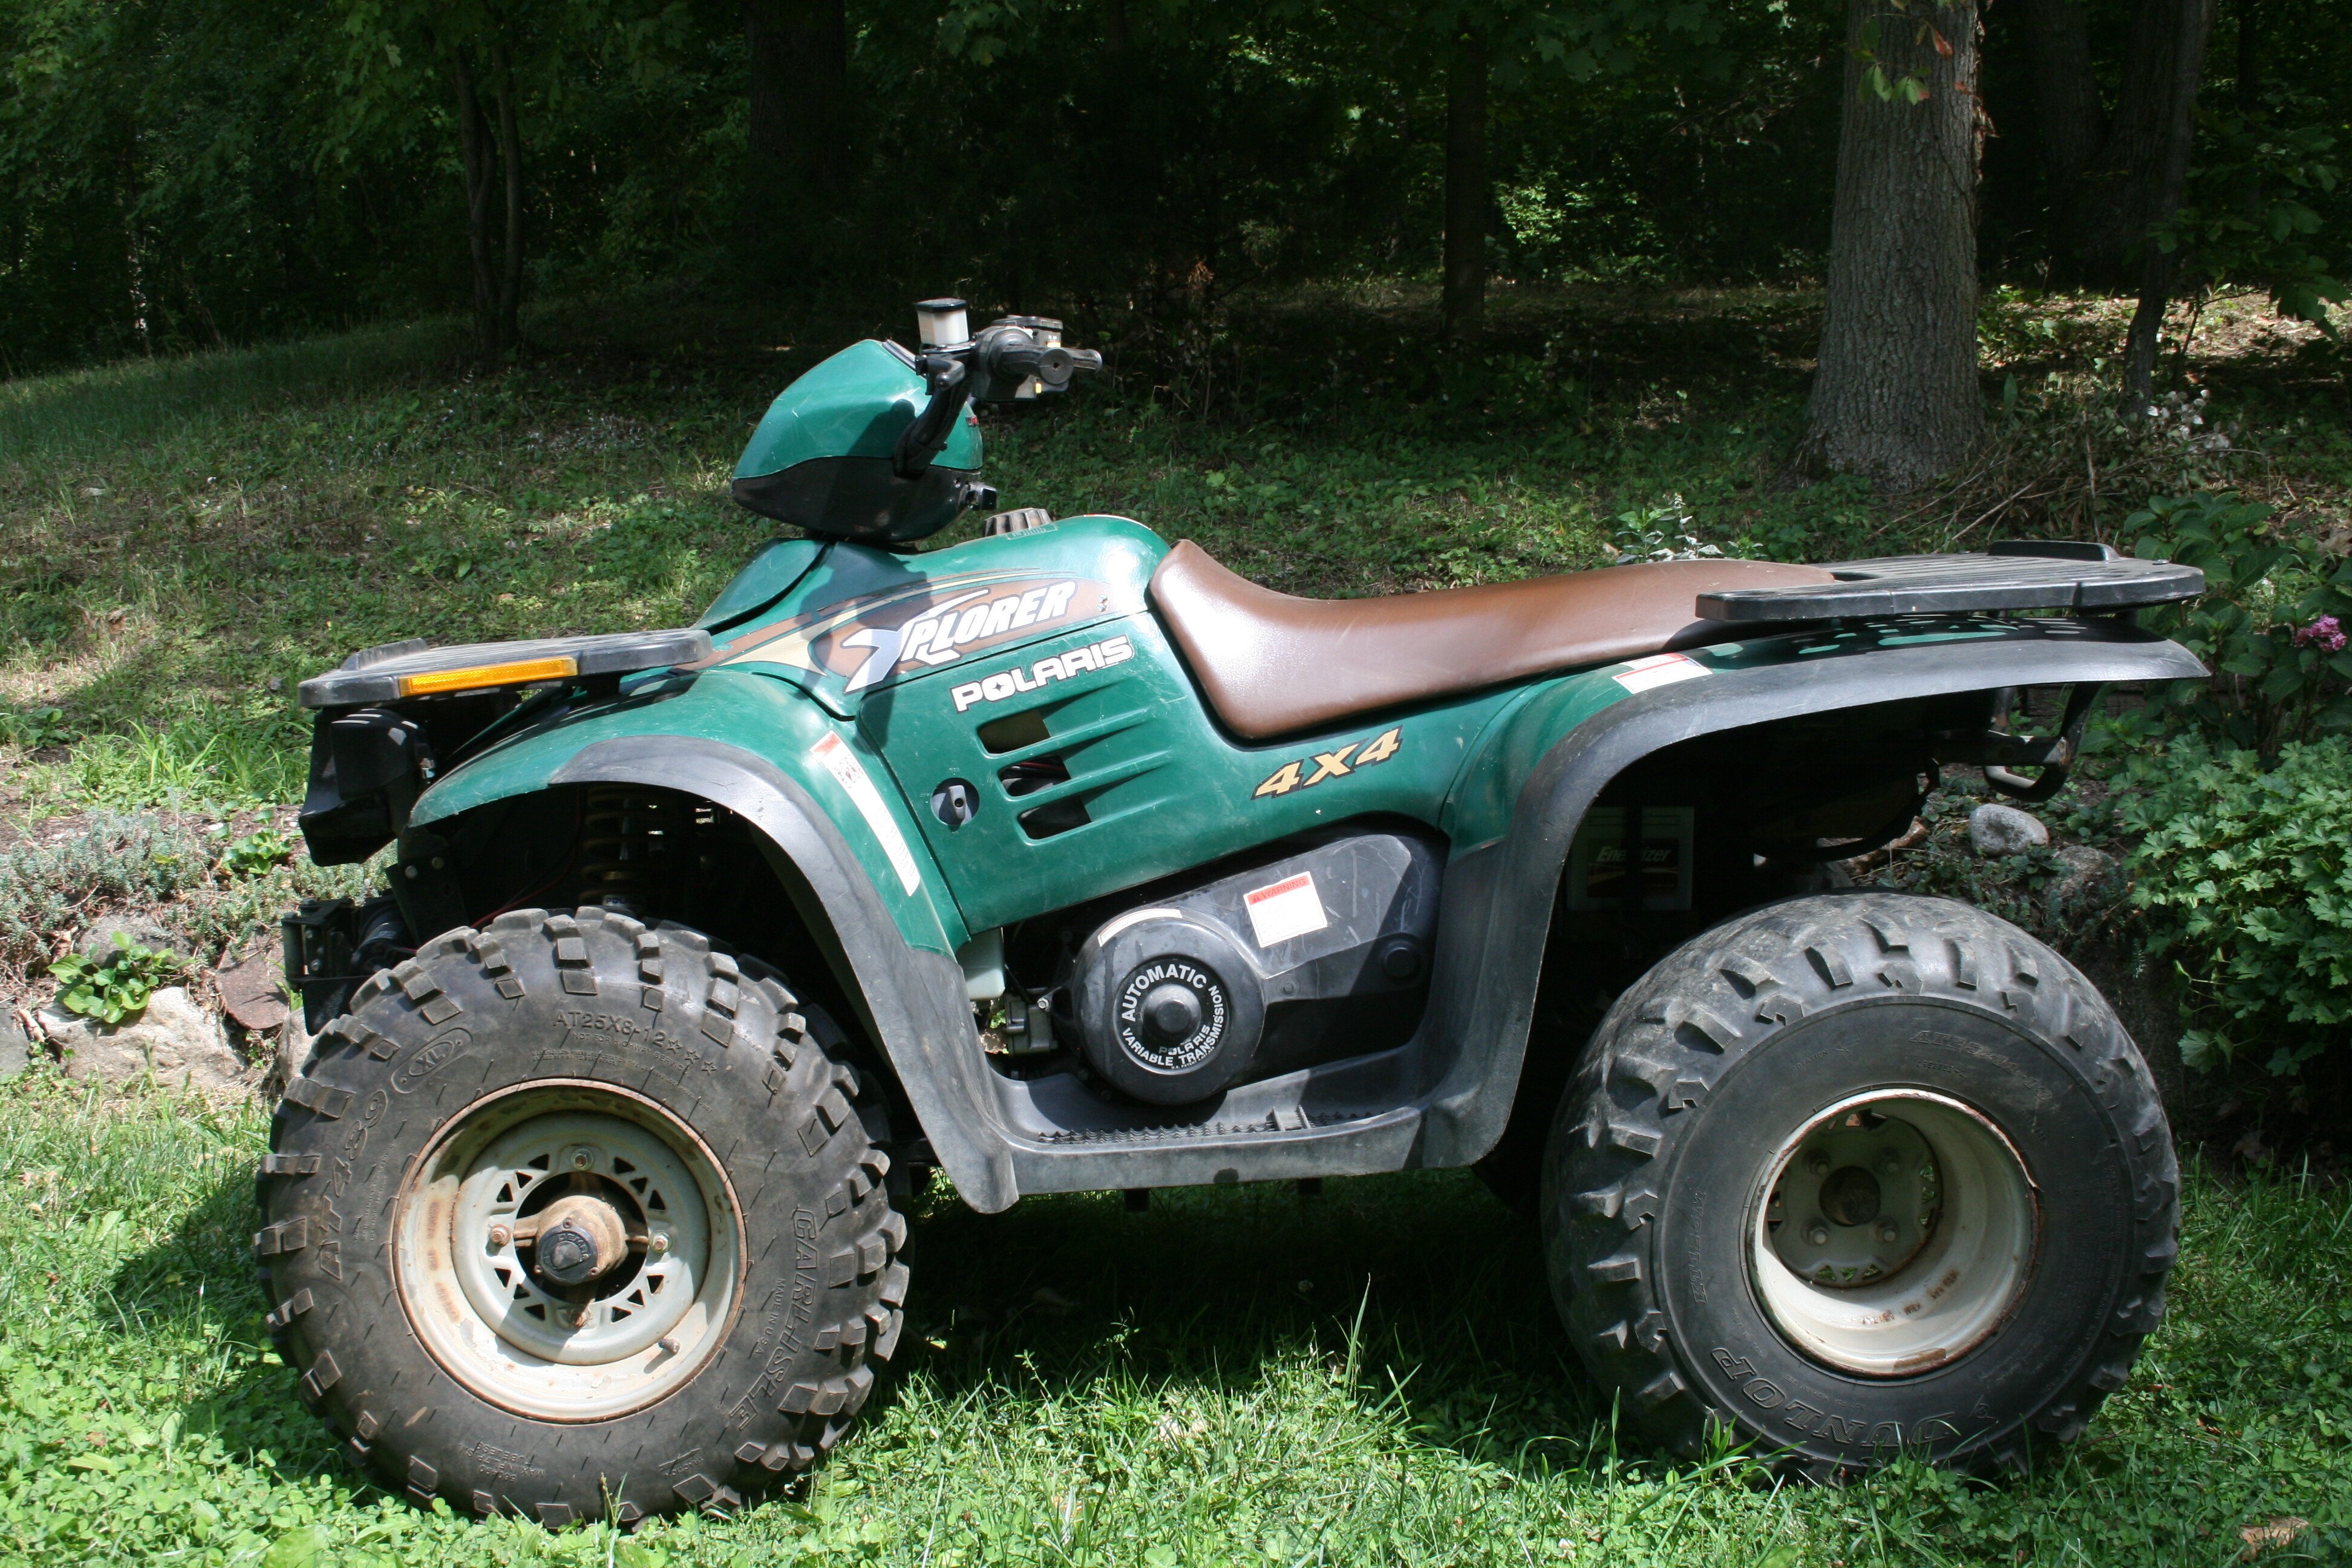 1999 Polaris Xplorer 400 Motorcycles For Sale Motorcycles On Autotrader